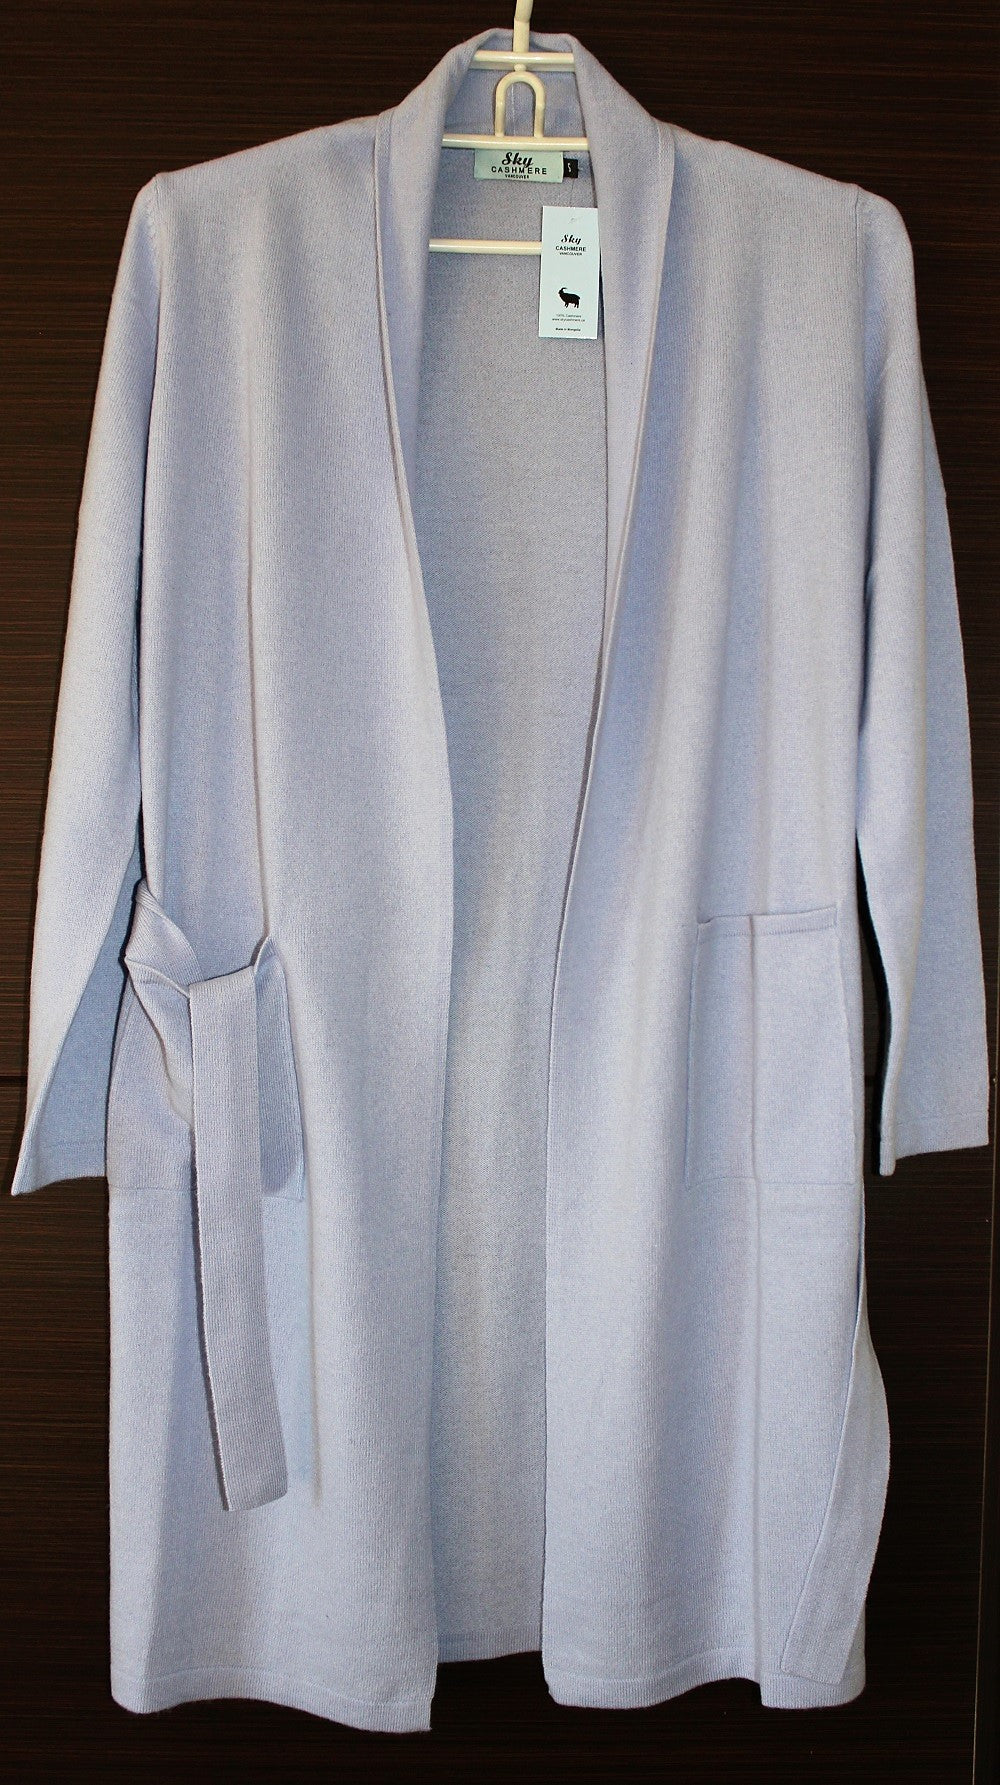 Womens Cashmere Long Robe